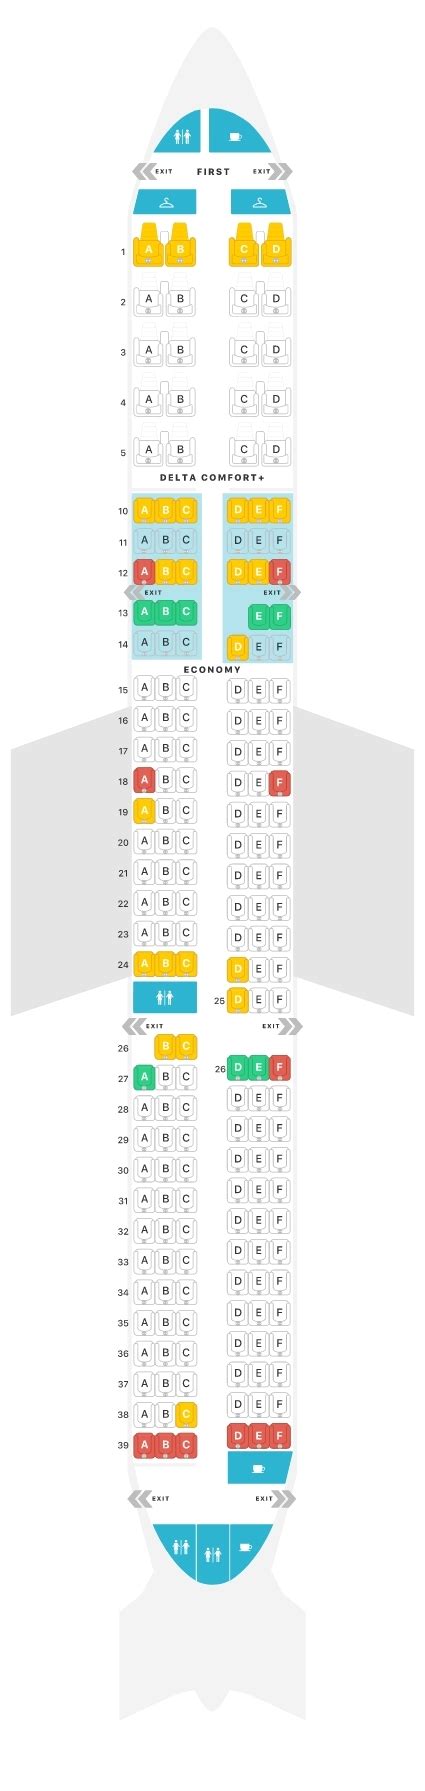 Delta A321 Seat Map